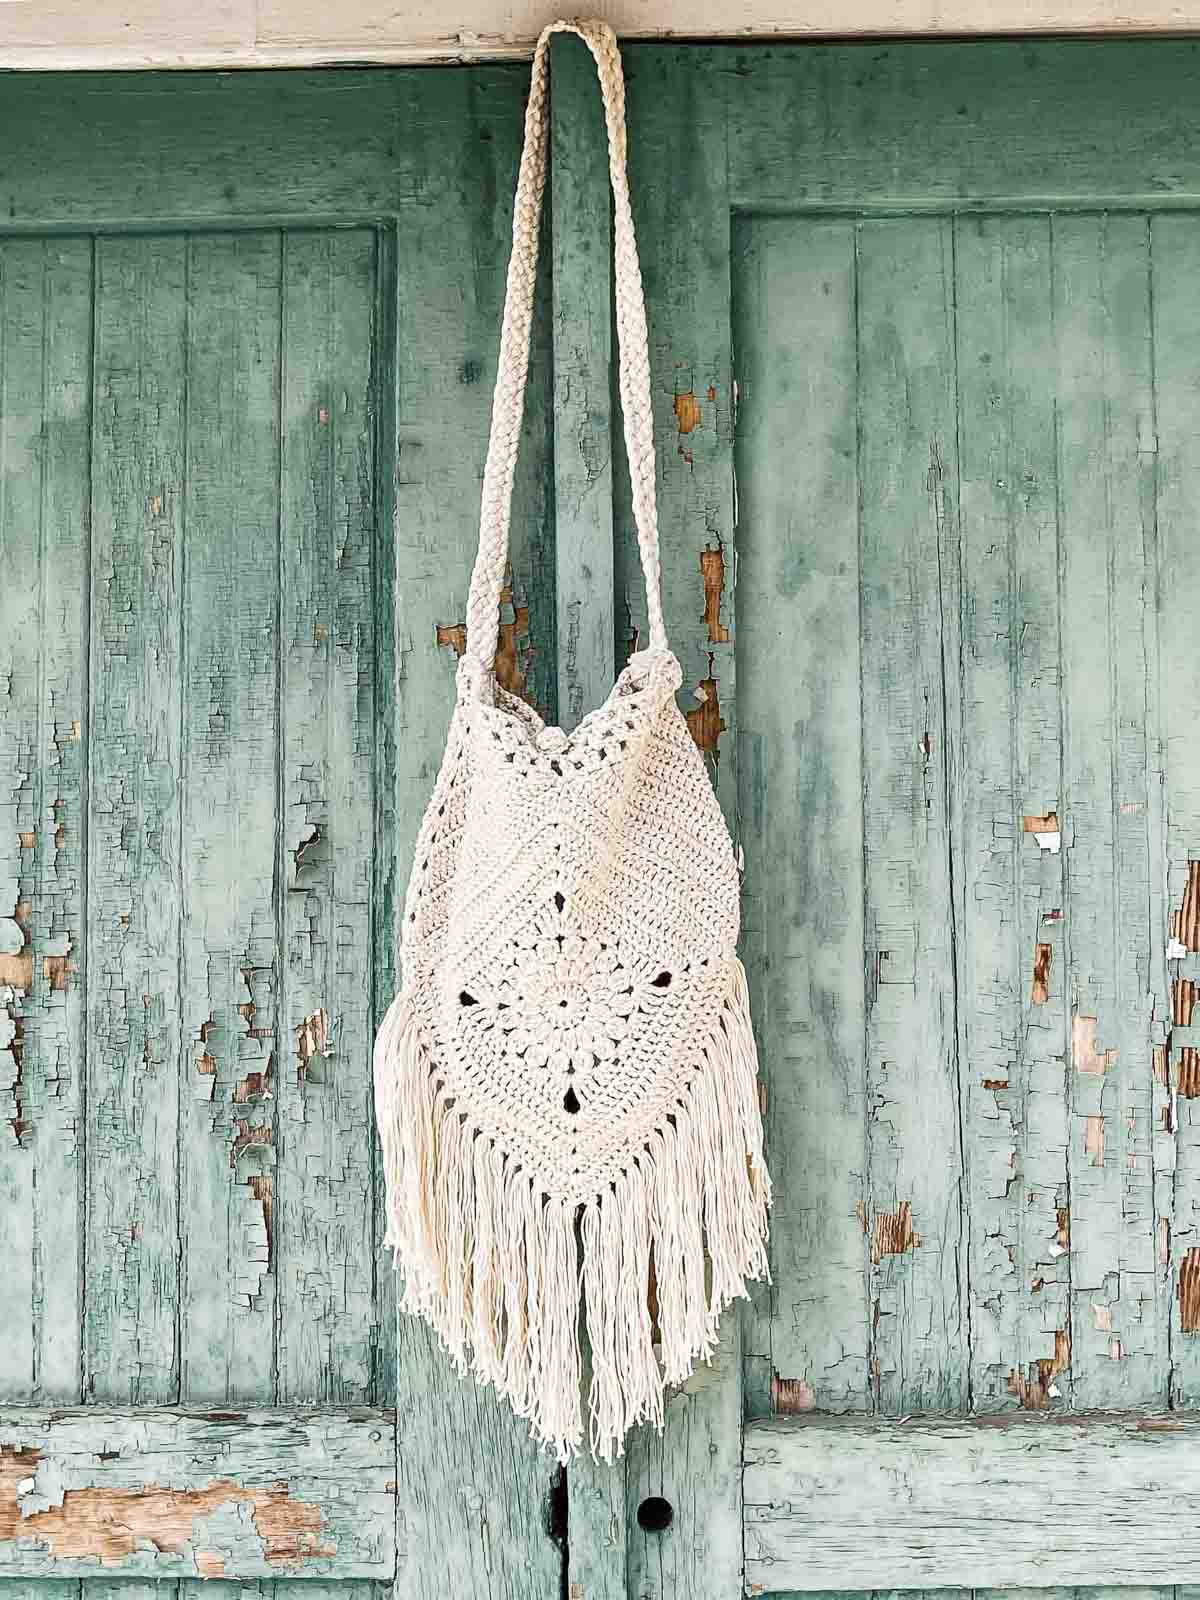 Crocheted boho bag with long fringe hanging on a rustic wall.